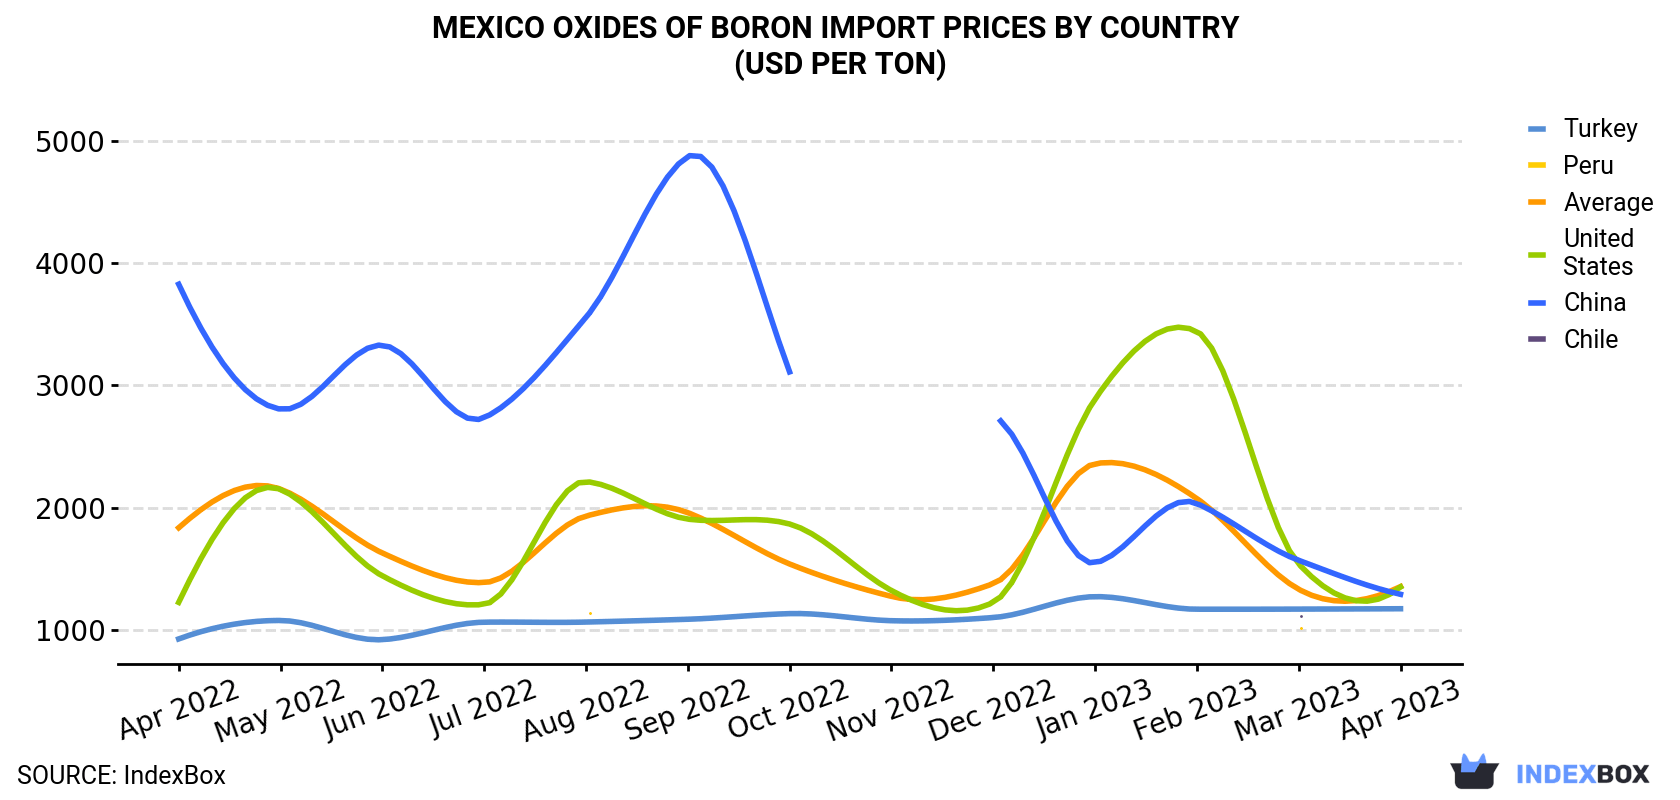 Mexico Oxides Of Boron Import Prices By Country (USD Per Ton)